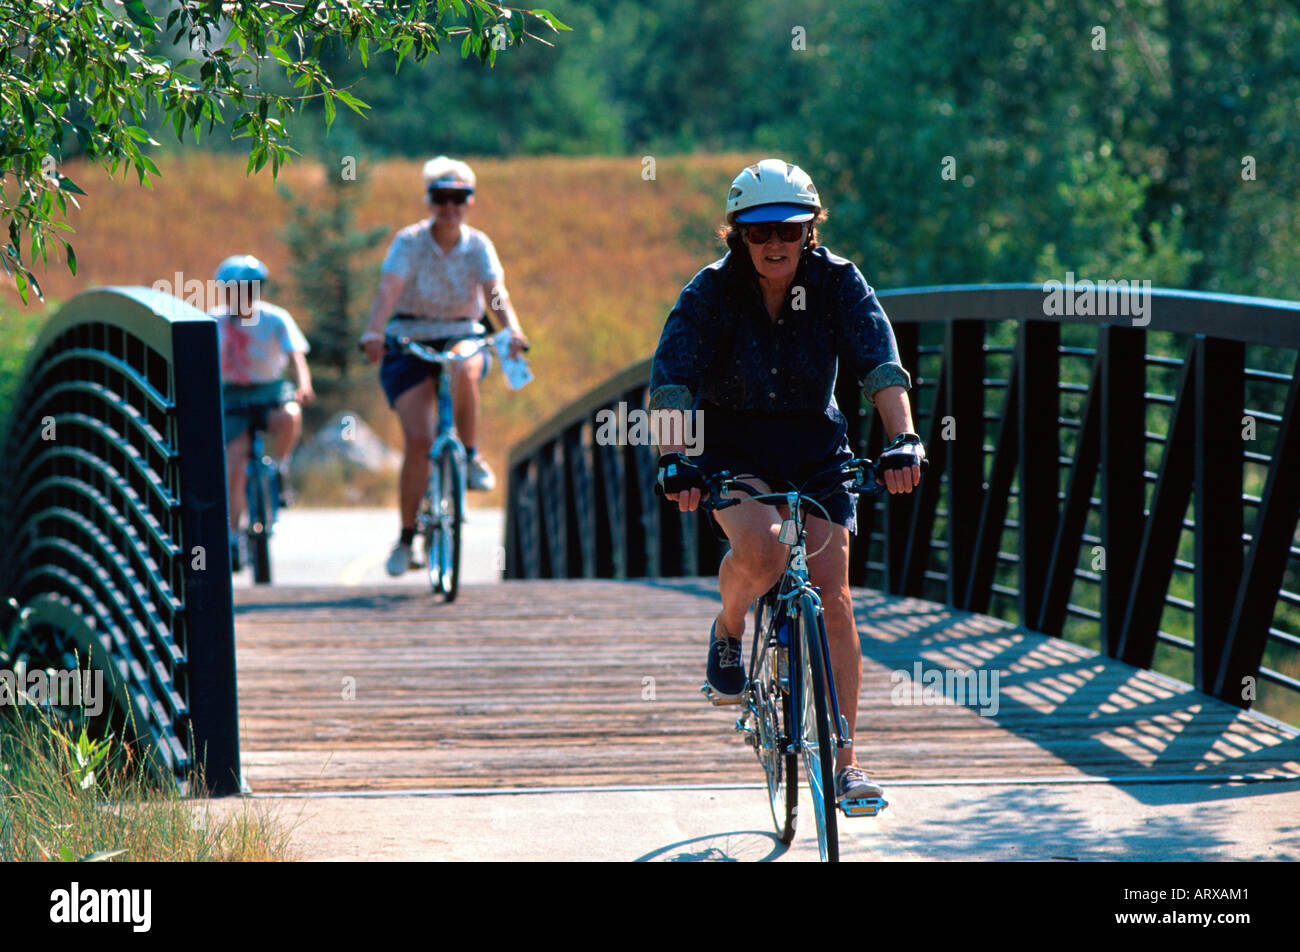 Cyclists on pedestrian bridge Steamboat Springs CO USA Stock Photo